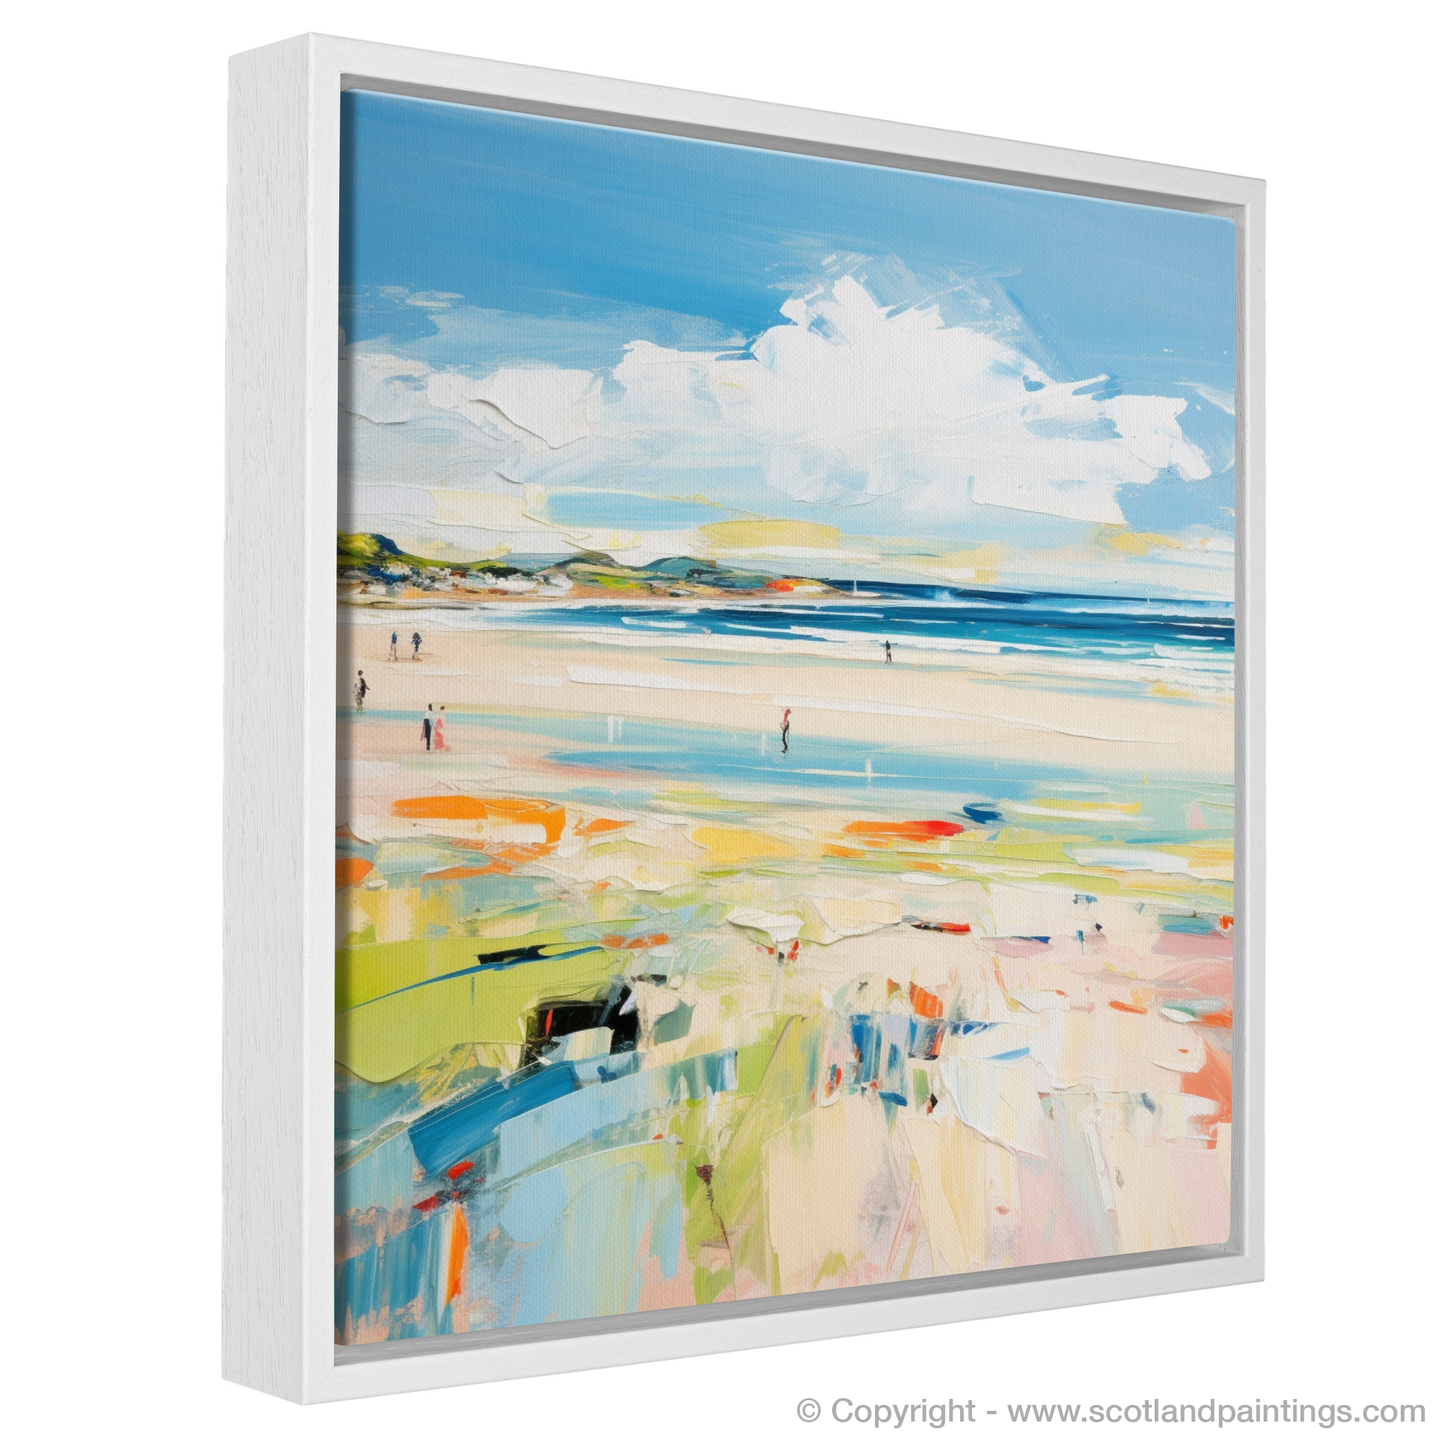 Painting and Art Print of St Cyrus Beach, Aberdeenshire in summer entitled "Summer Serenity at St Cyrus Beach".